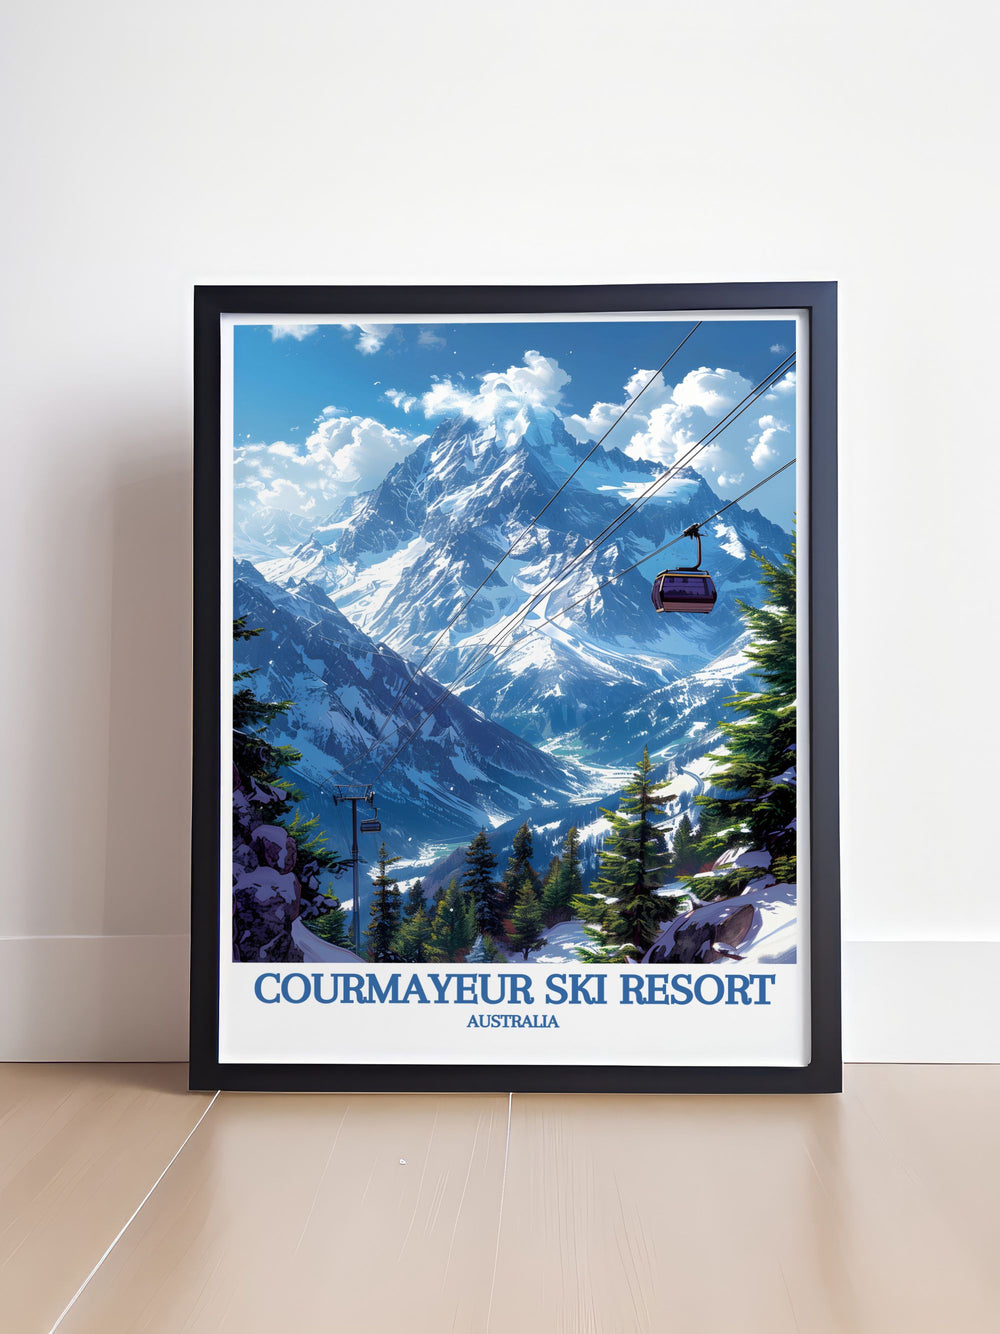 Illustrated with a vintage style, this retro travel print brings the stunning landscapes of Courmayeur and Mont Blanc to life, ideal for enhancing any room with the beauty of the Italian Alps.